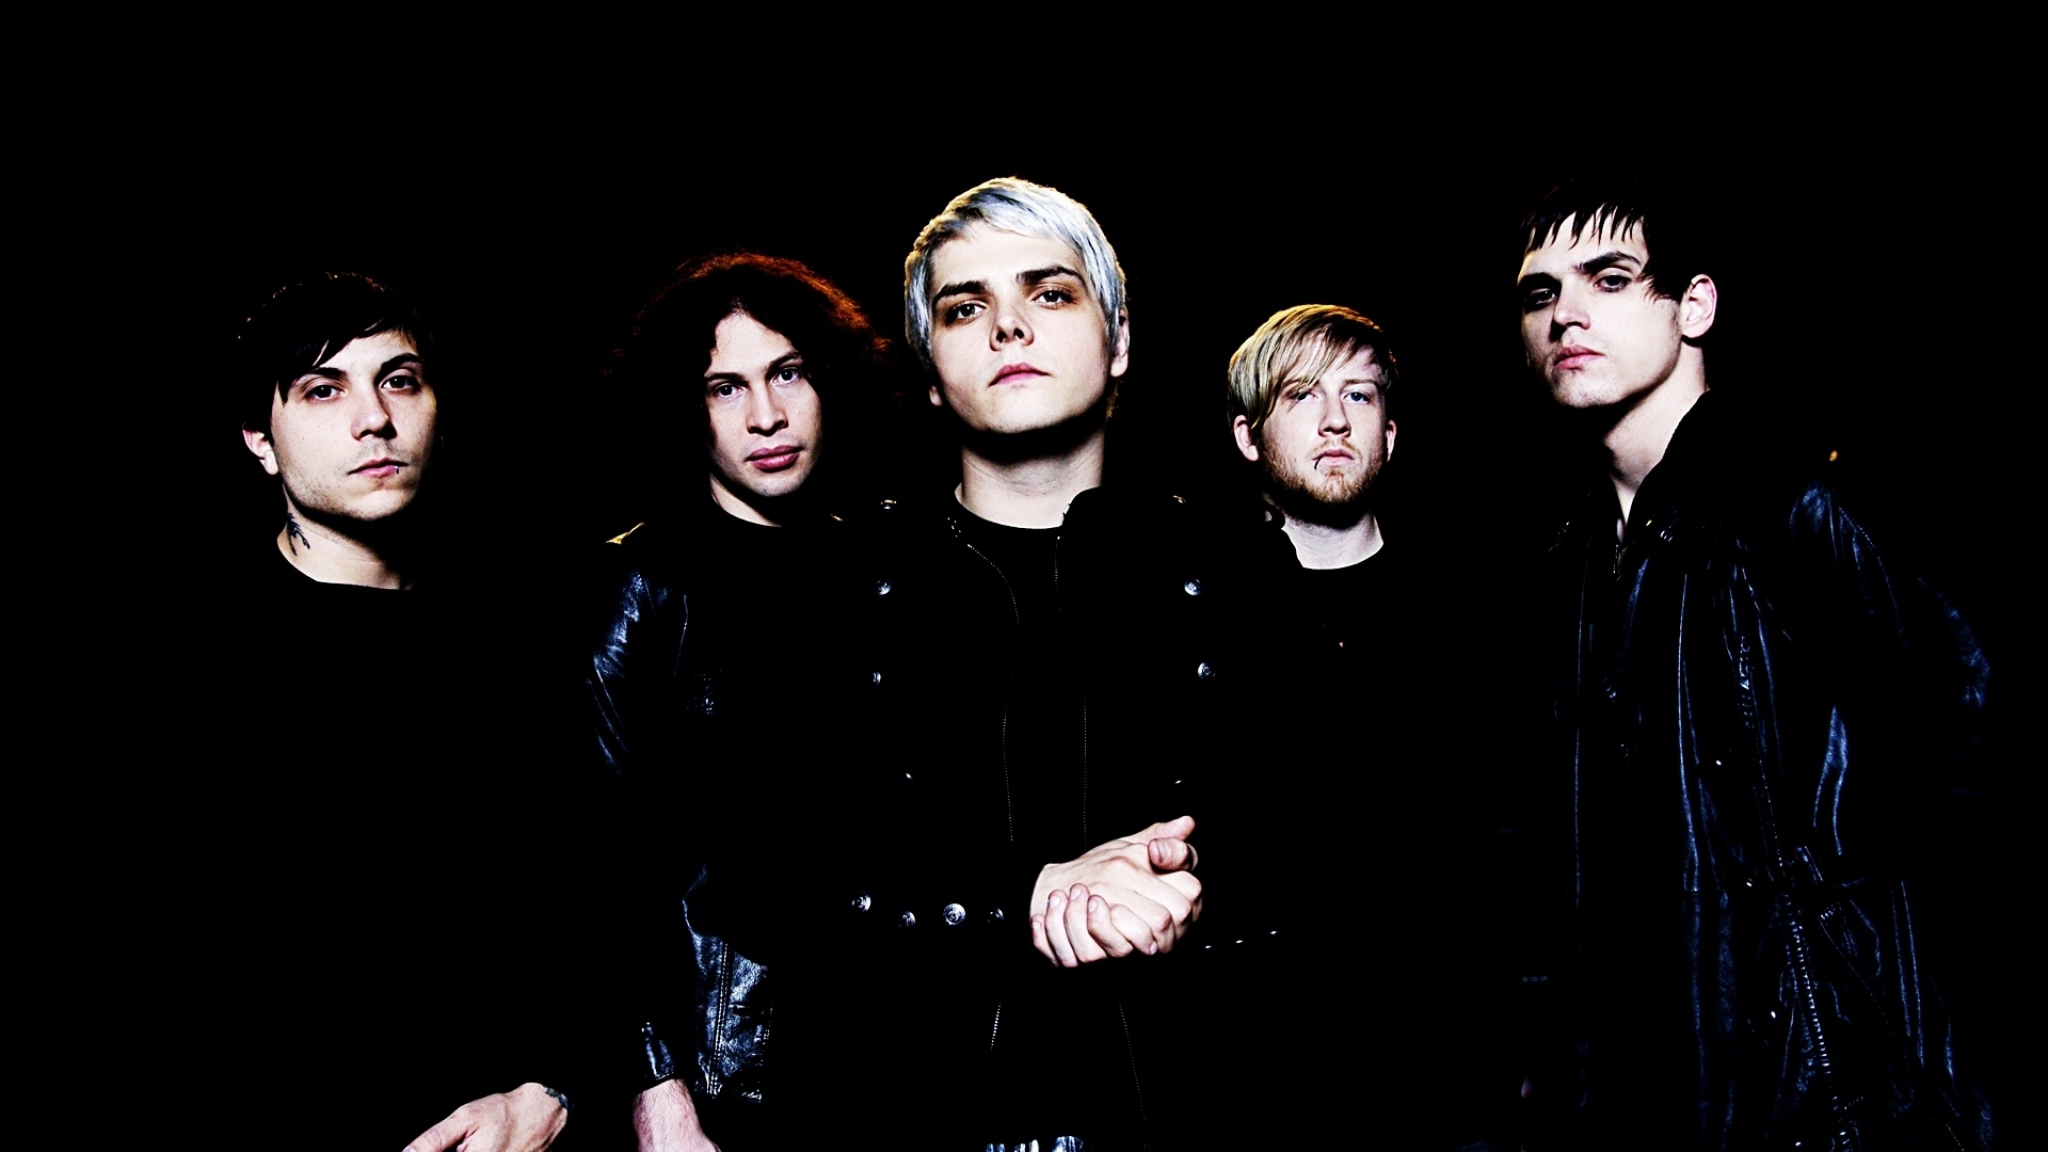 Download Wallpaper 2048x1152 My chemical romance, Band, Members